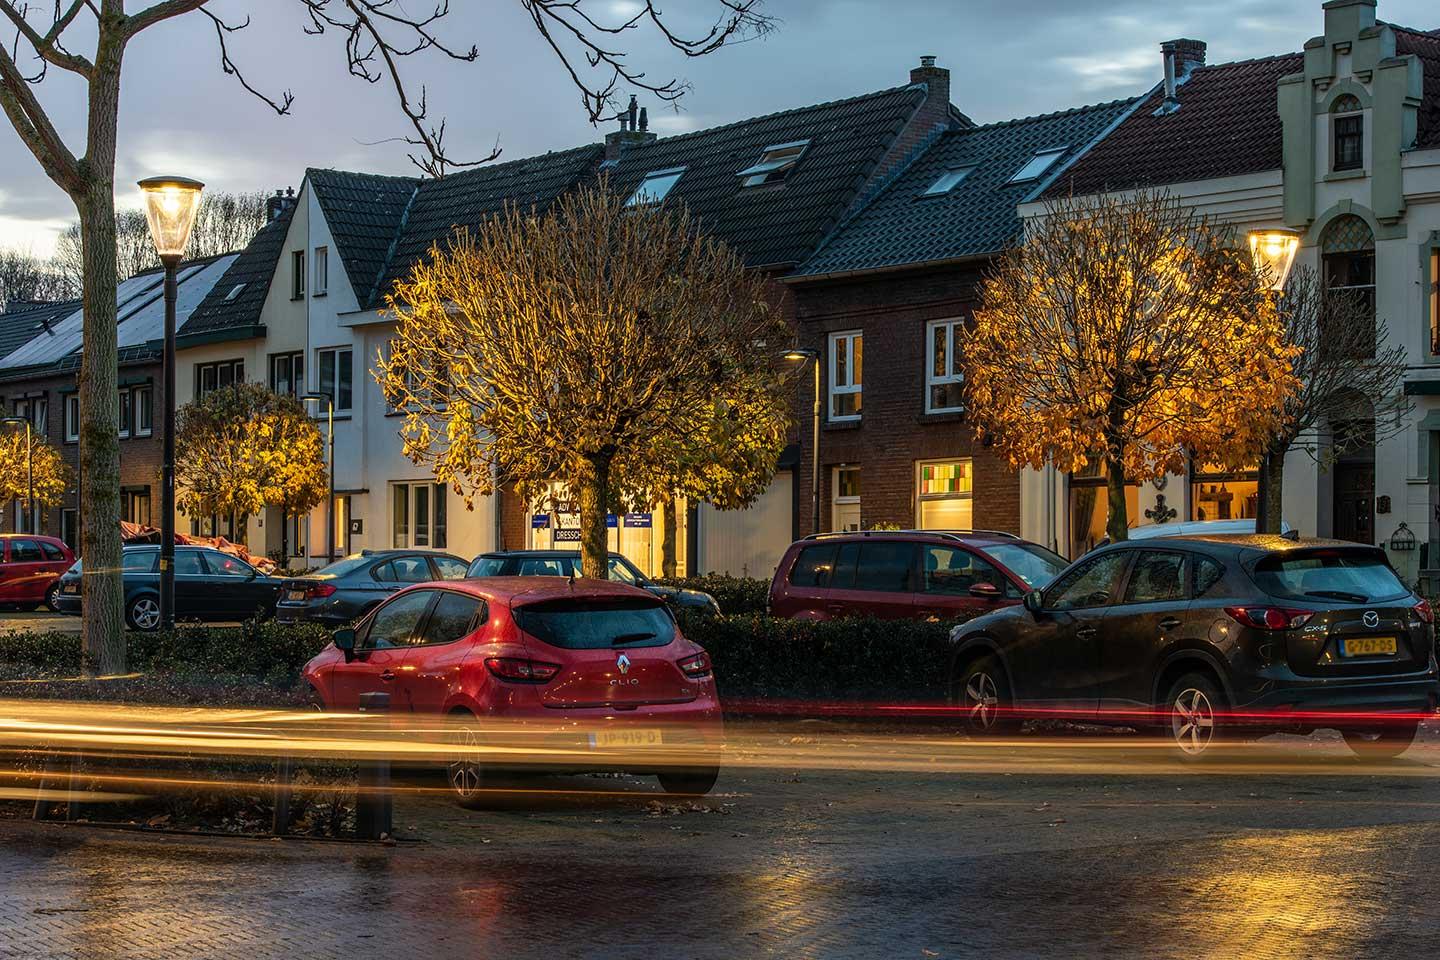 FLEXIA provides a sustainable lighting solution to help the town of Brunssum achieve a circular economy